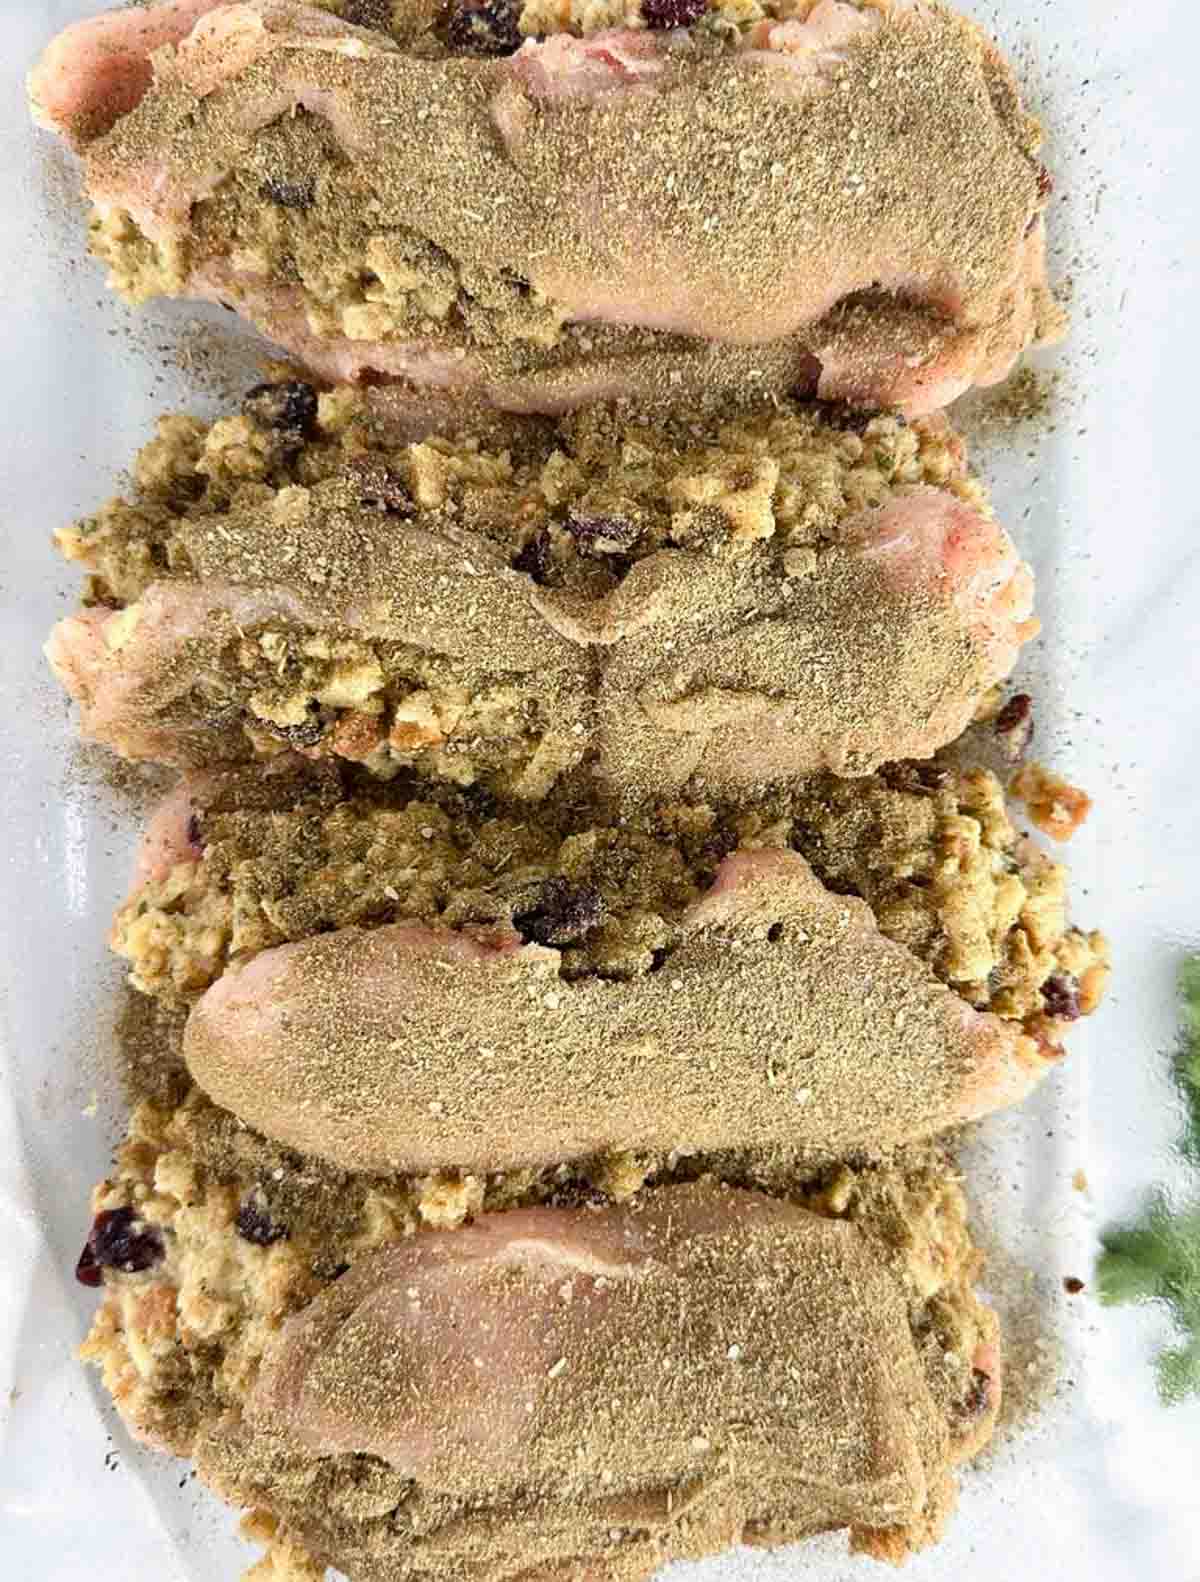 Season the stuffing stuffed chicken breasts with a blend of poultry seasoning, onion powder, garlic powder, and salt and pepper